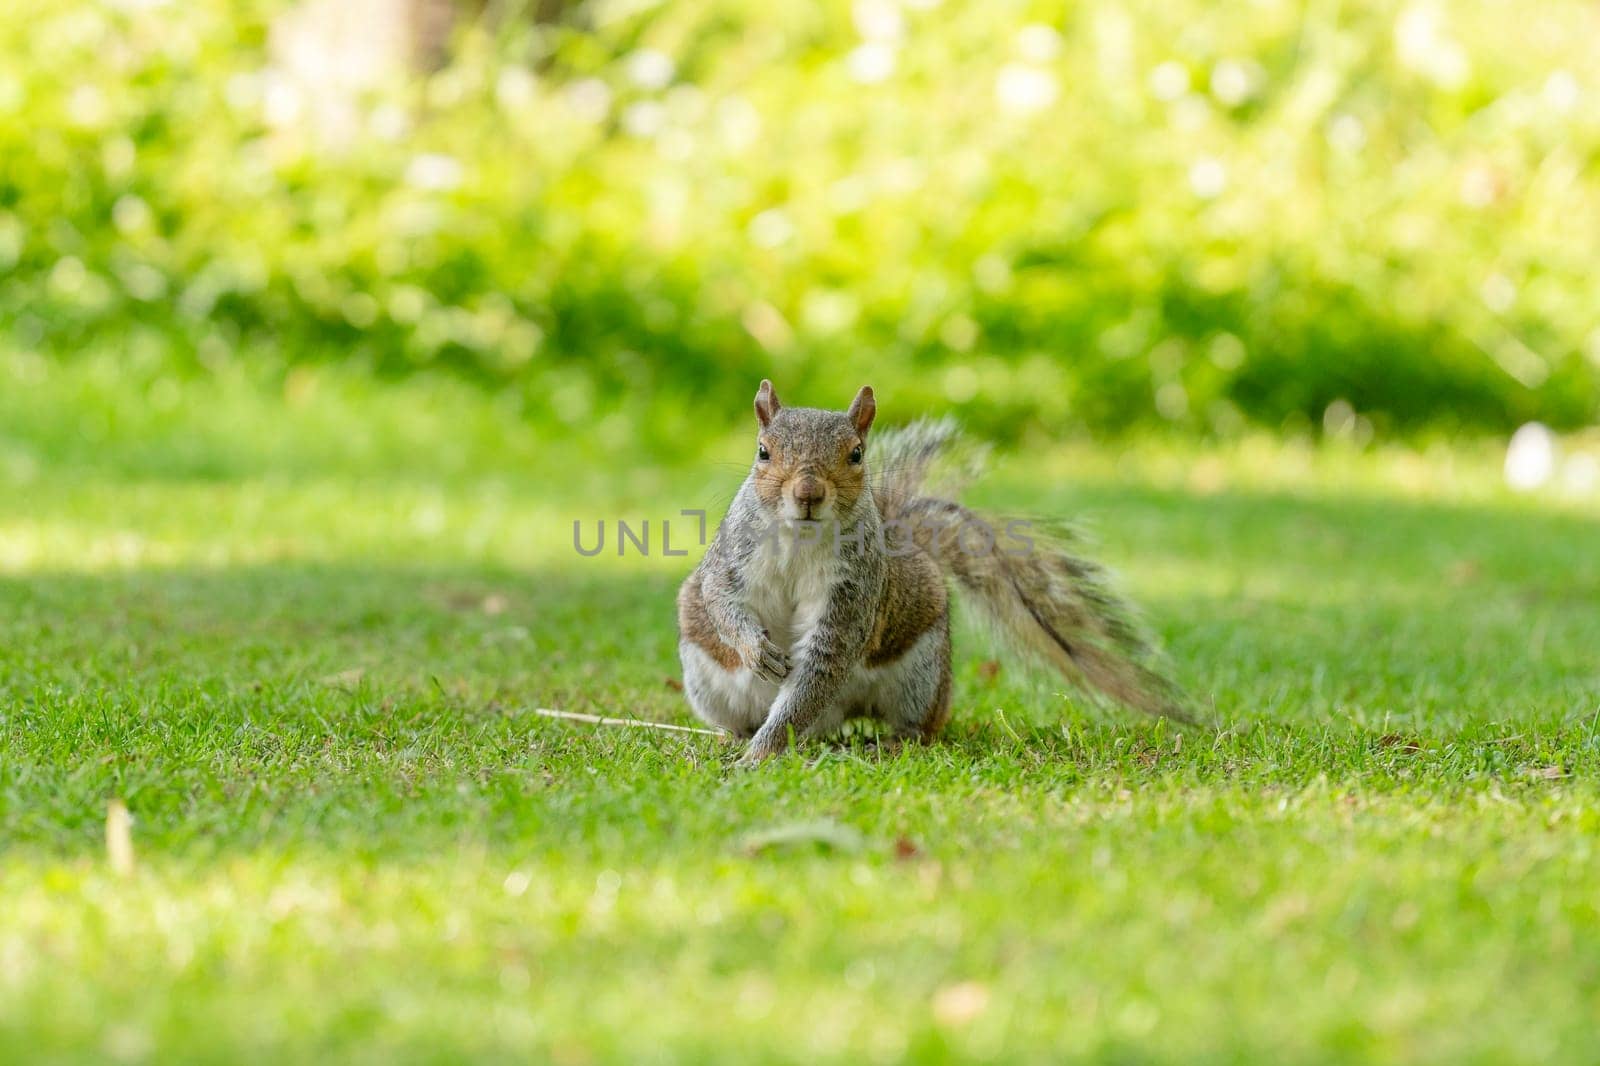 One gray squirrel on the green grass on sunny day in English public park by Iryna_Melnyk